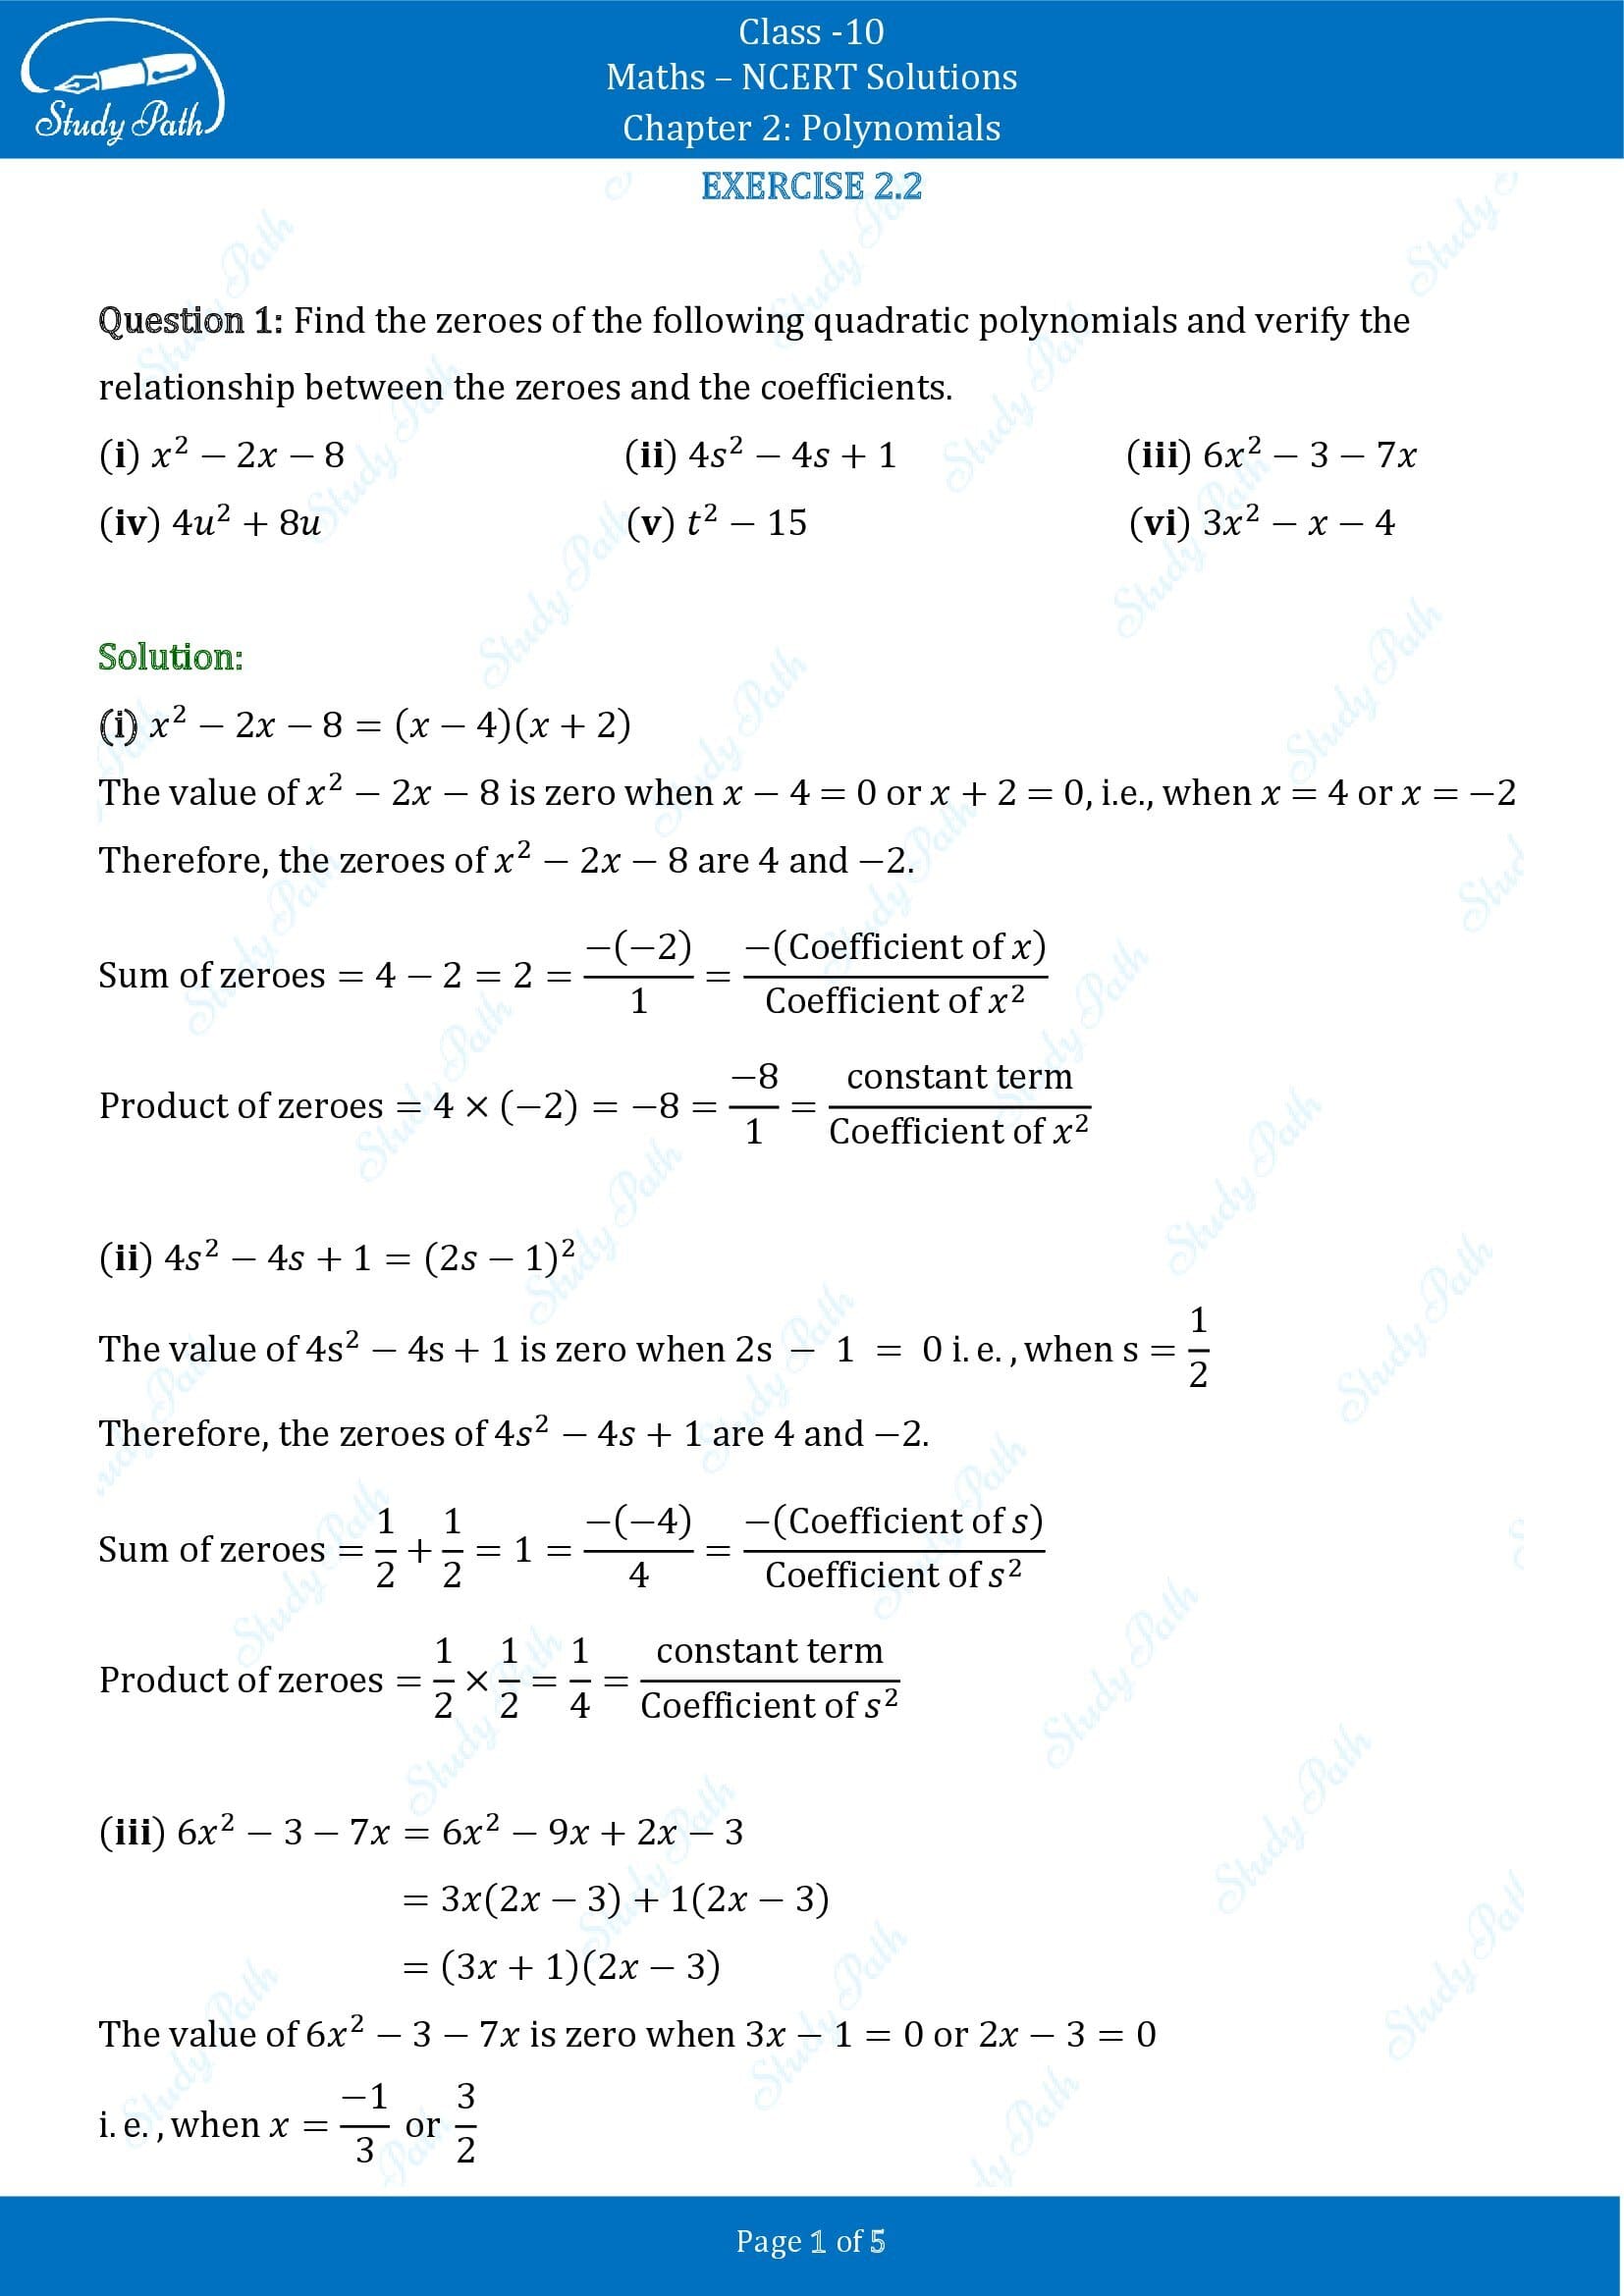 NCERT Solutions for Class 10 Maths Chapter 2 Polynomials Exercise 2.2 00001